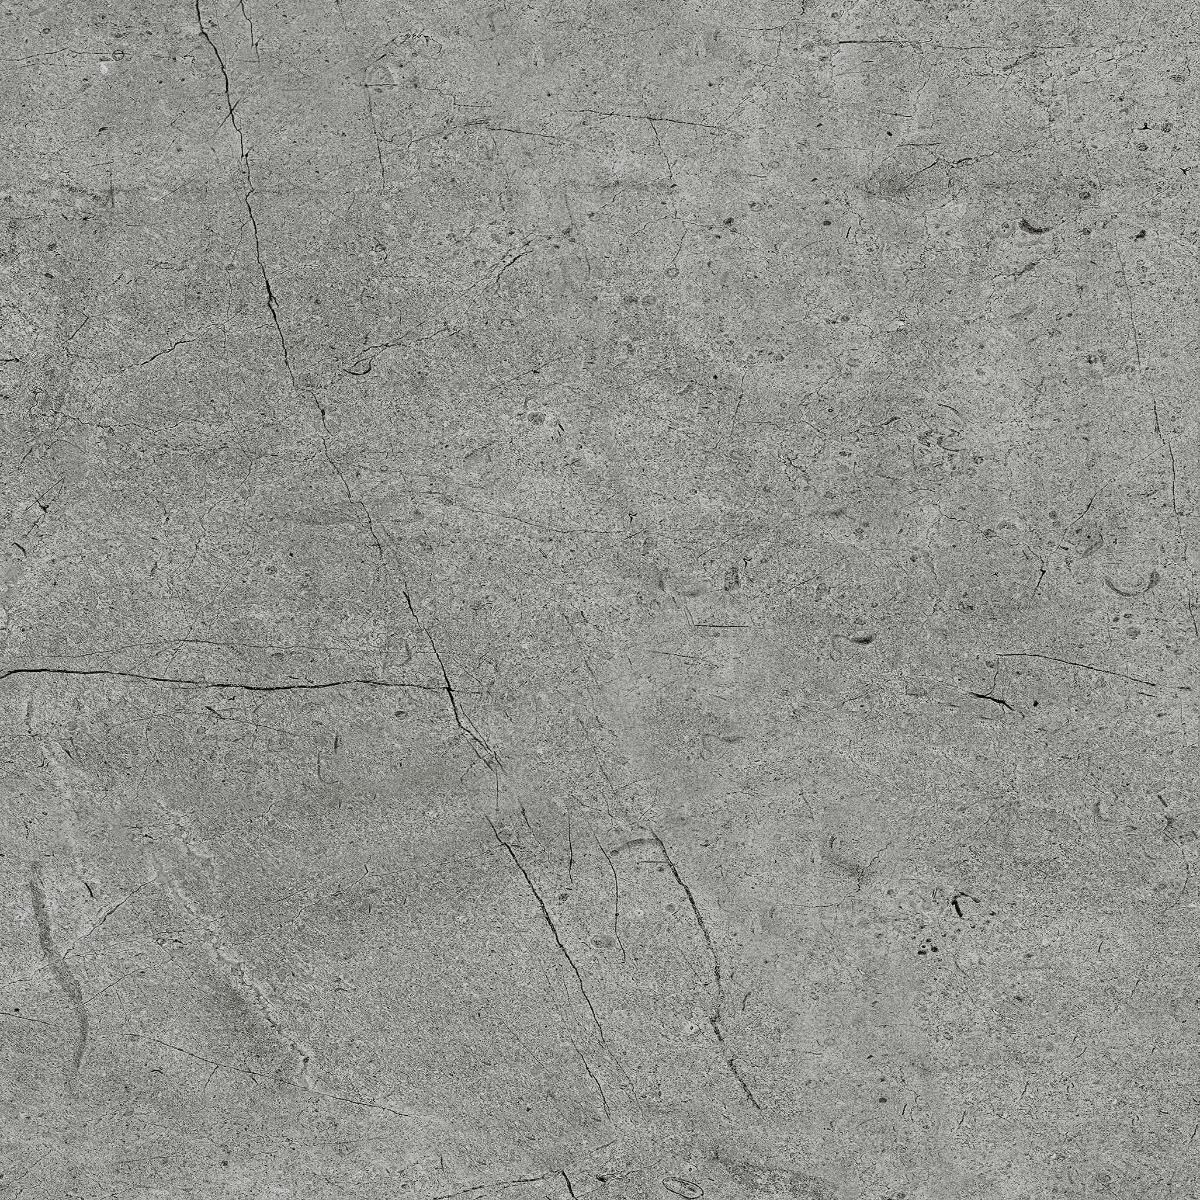 Bottochino Tiles for Bathroom Tiles, Living Room Tiles, Bedroom Tiles, Accent Tiles, Hospital Tiles, High Traffic Tiles, Bar/Restaurant, Commercial/Office, Outdoor Area, School & Collages